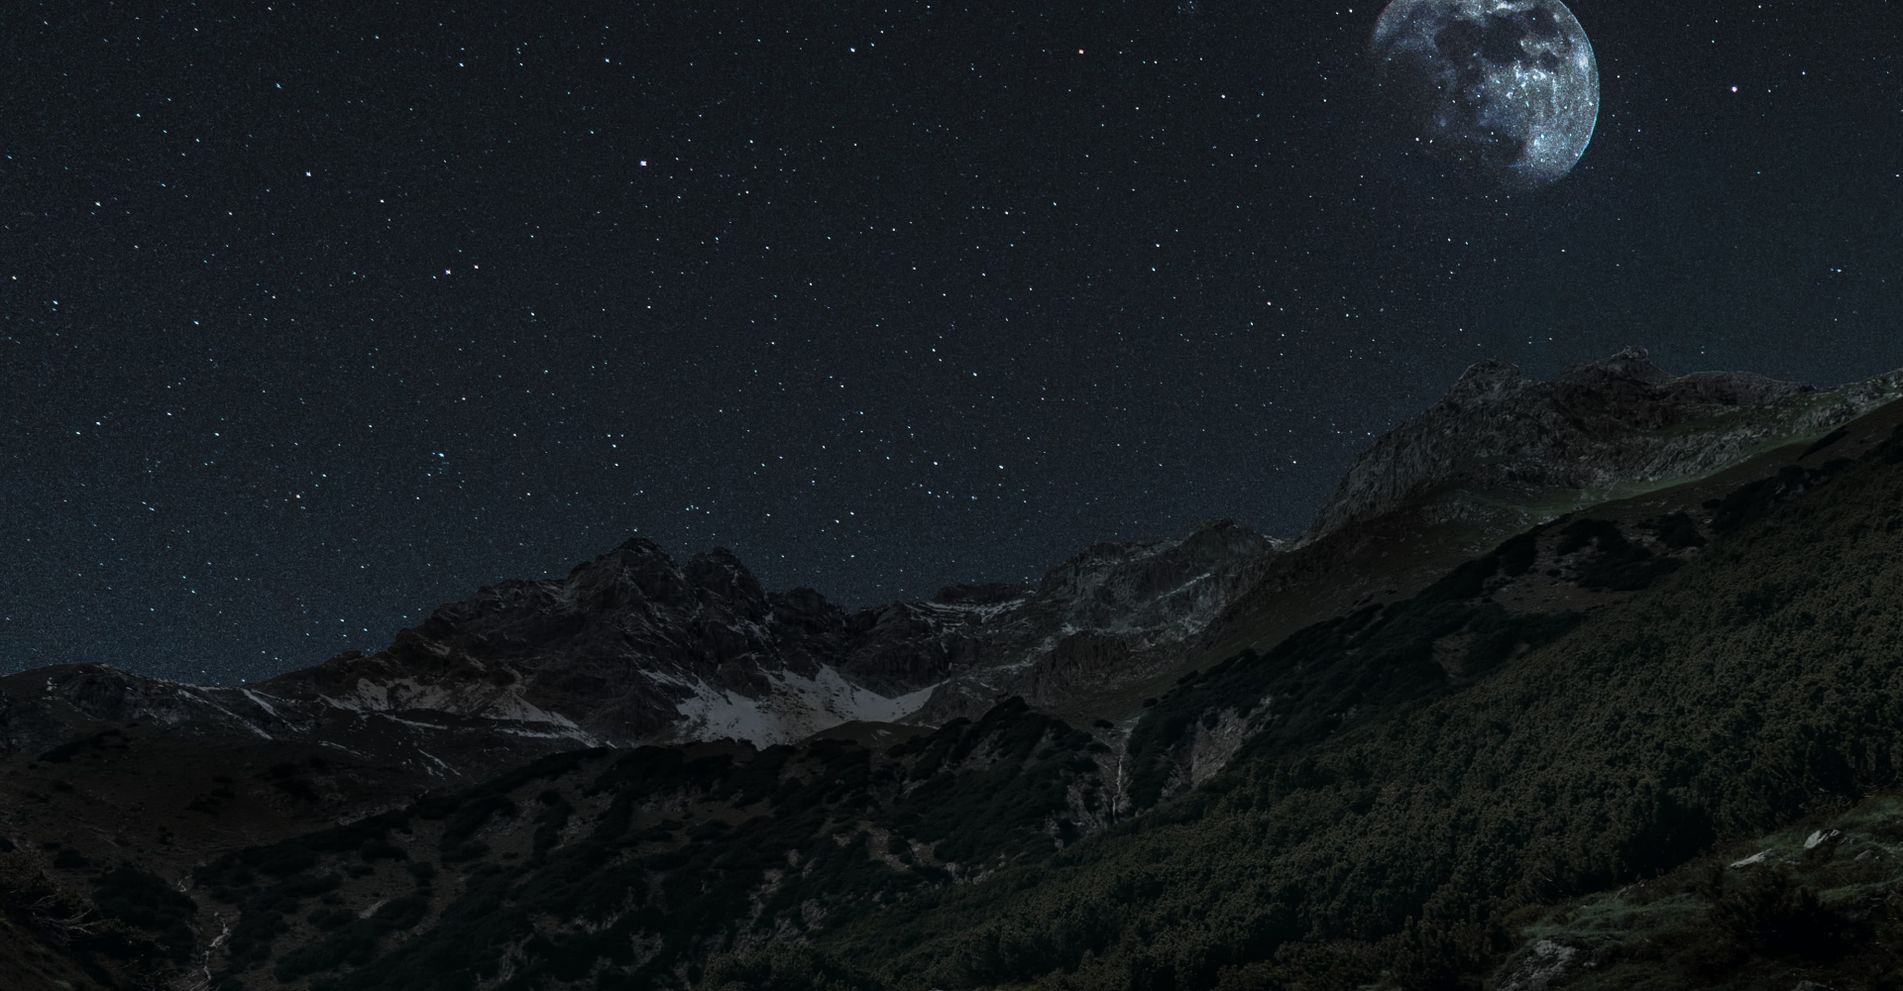 A scenic view of mountains at nighttime with stars in the sky.